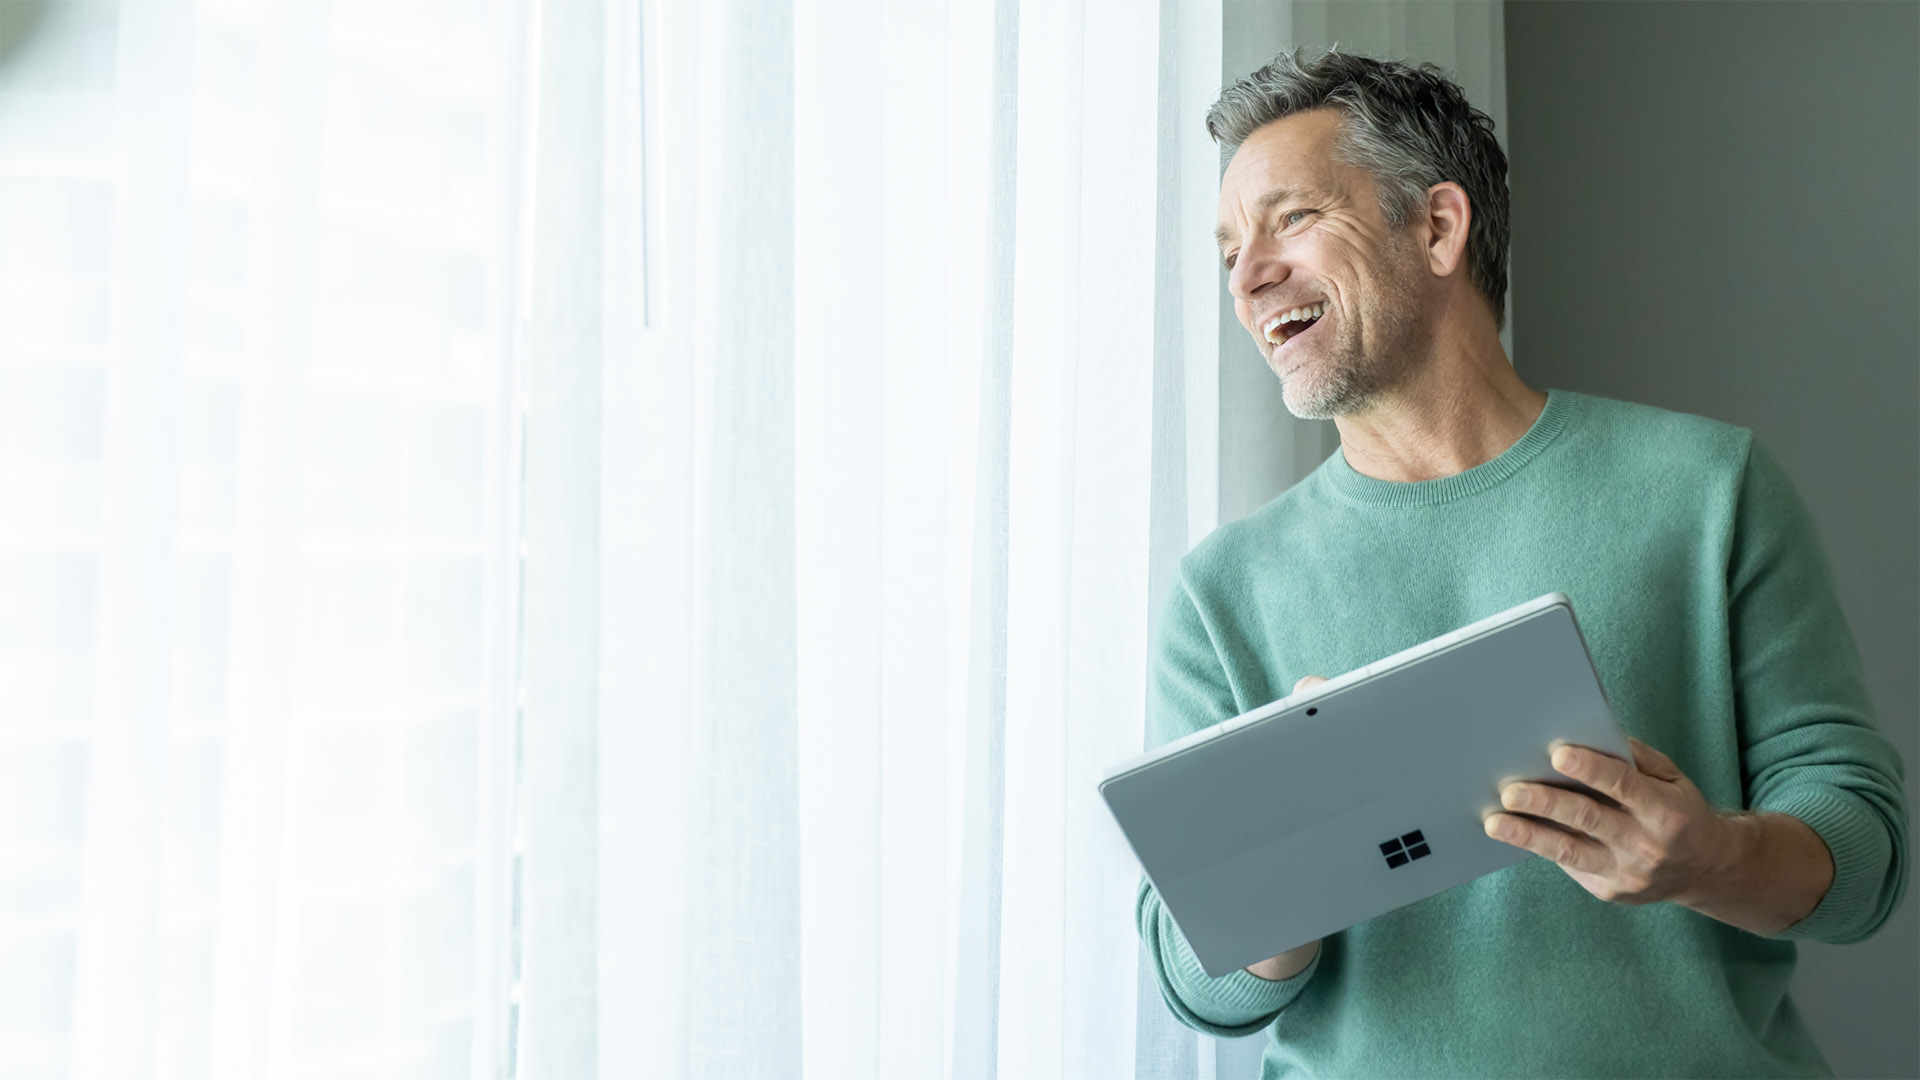 A man standing, smiling, and looking out a window while holding a Surface device